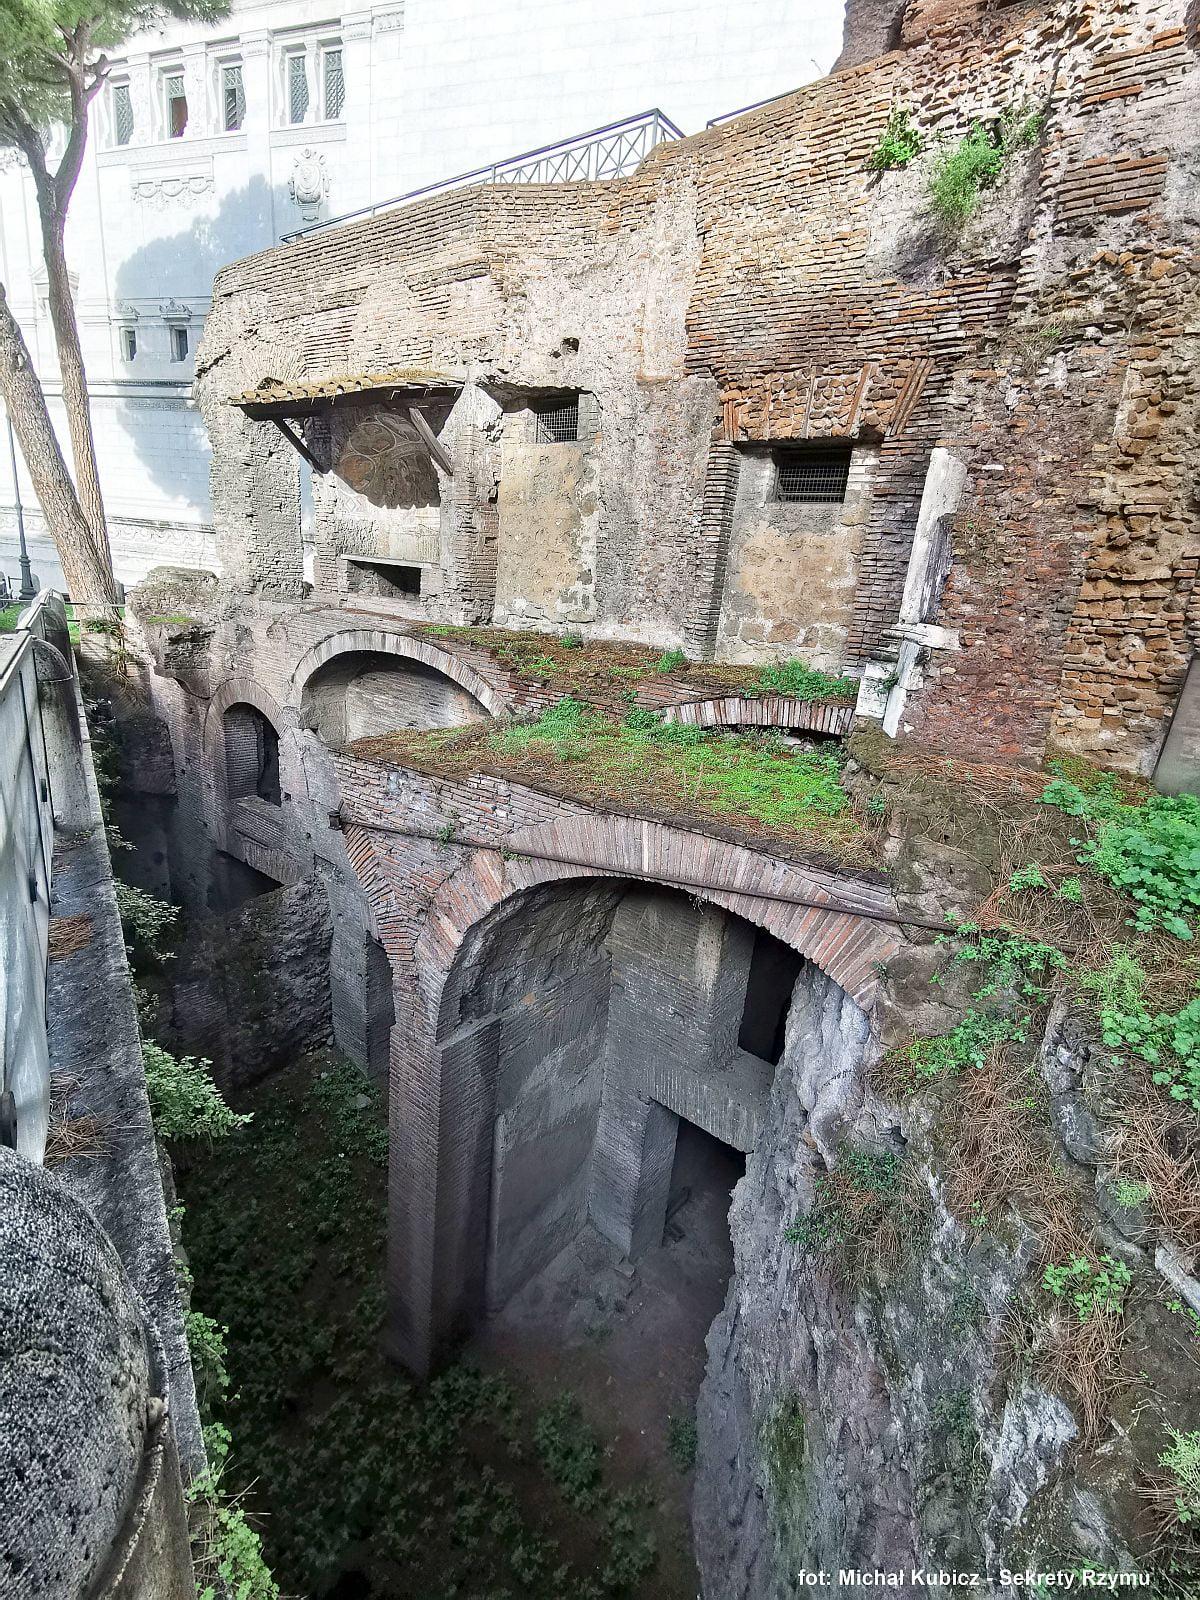 Insula Ara Coeli in Rome. The photos were taken from the level of a modern pavement; underground is a high ground floor and a mezzanine. The photos perfectly show how the ground level has risen over the centuries.jpeg